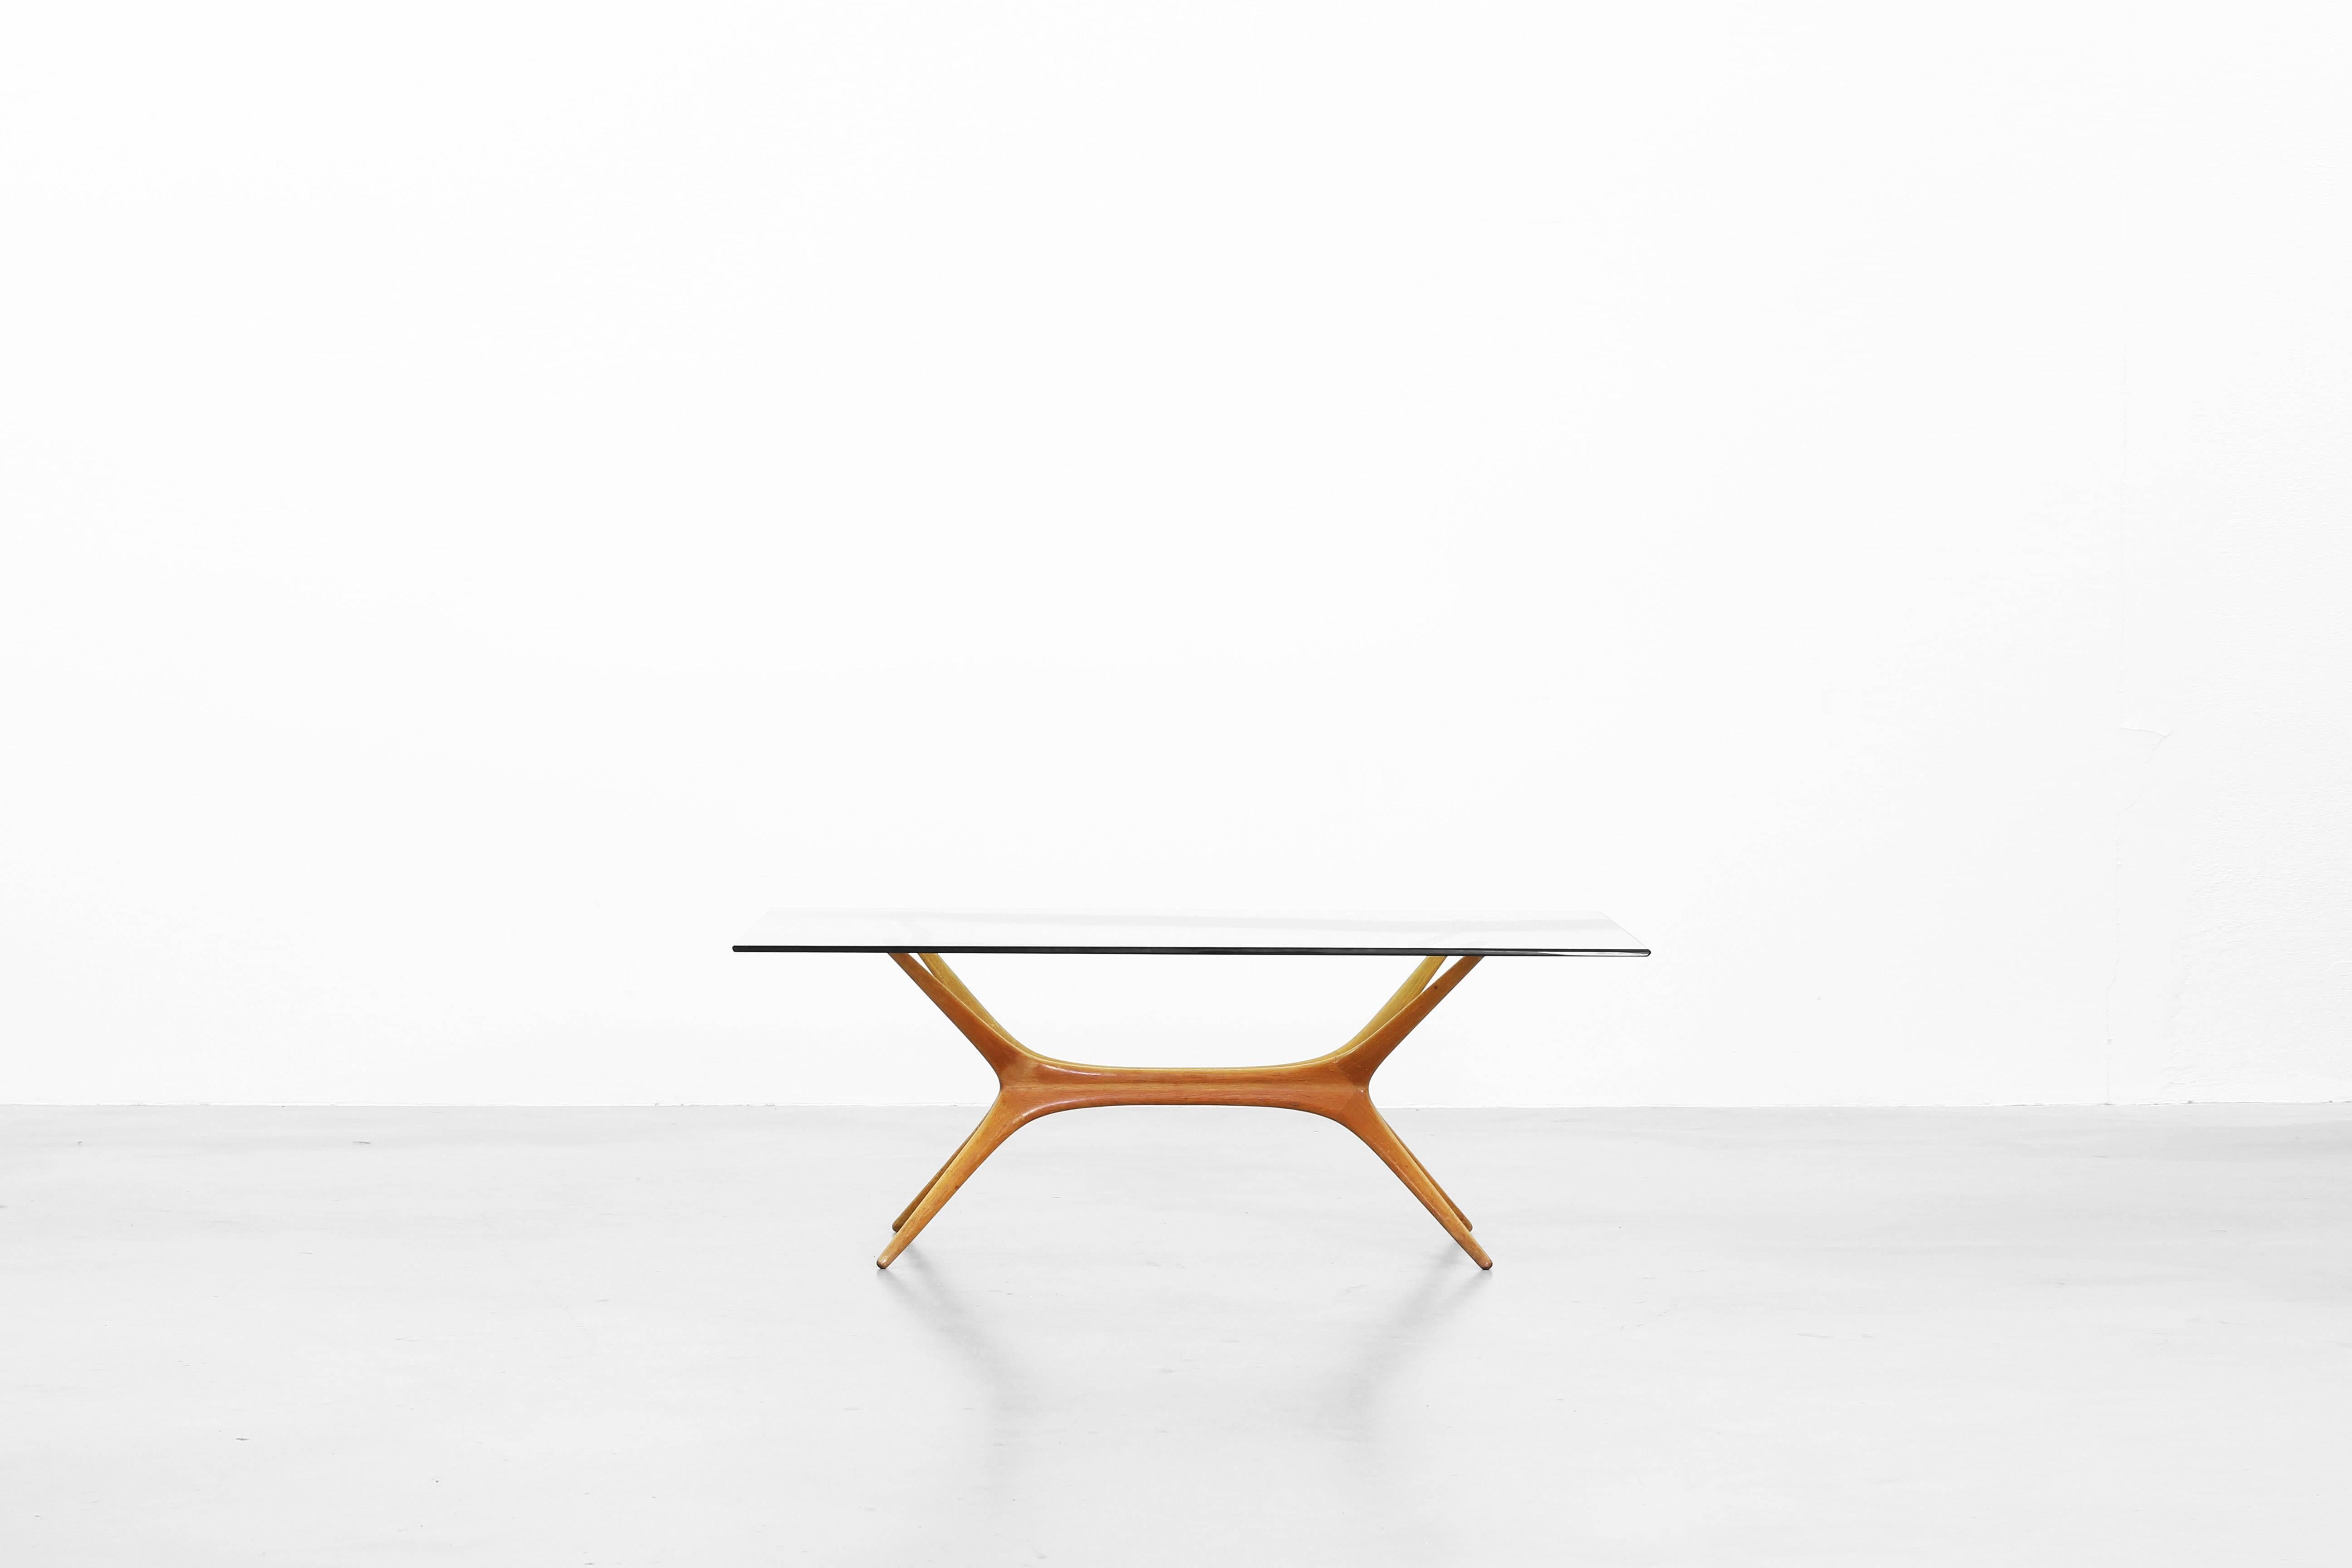 Beautiful coffee table by Tapio Wirkkala for Asko, Finland. This rare coffee table is made of oak and comes in a great condition. The table is marked on the underside with 